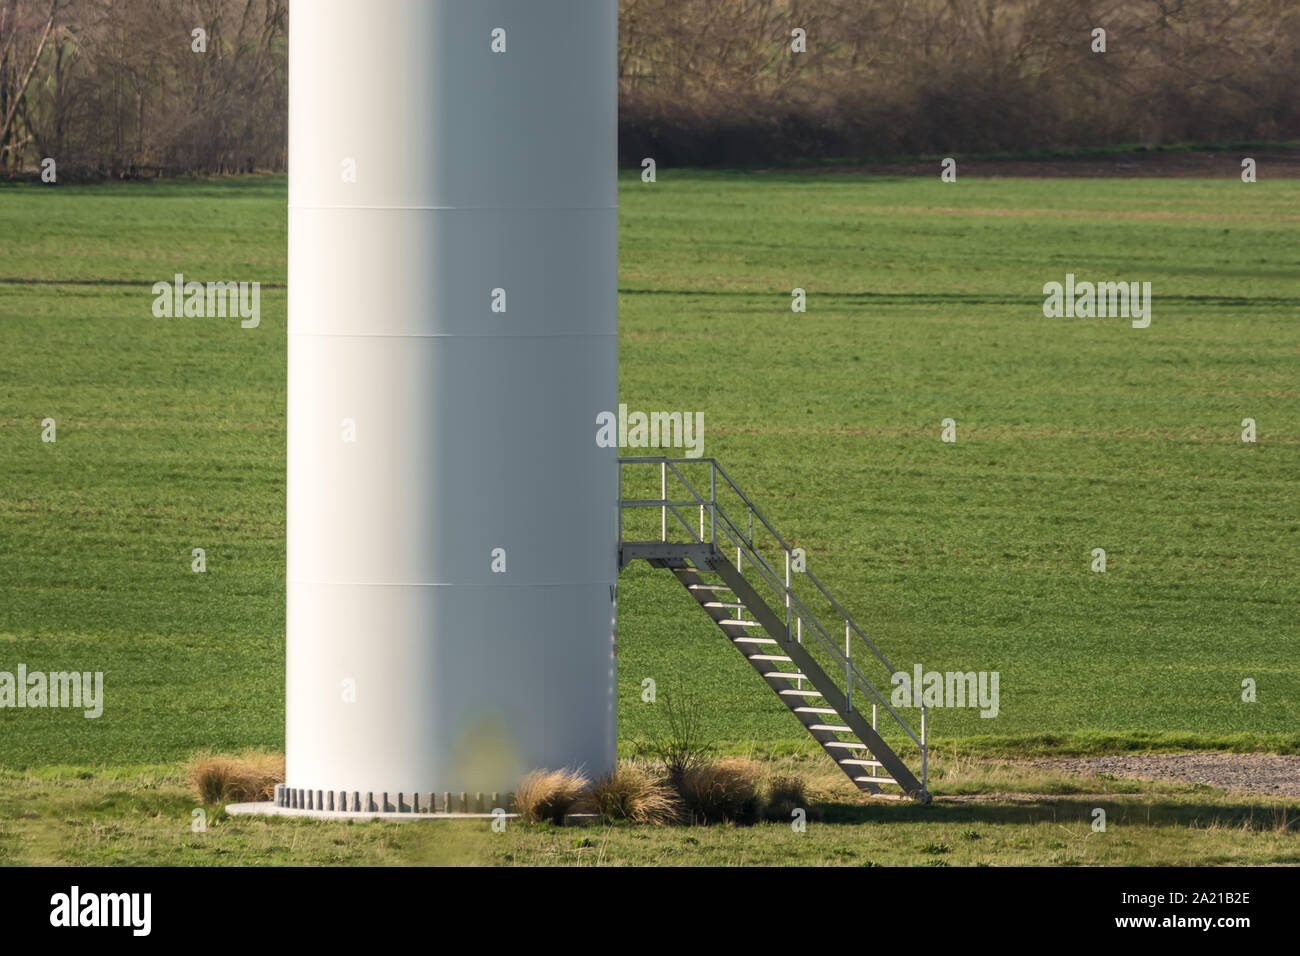 Entrance to a wind turbine with steel tube tower Stock Photo